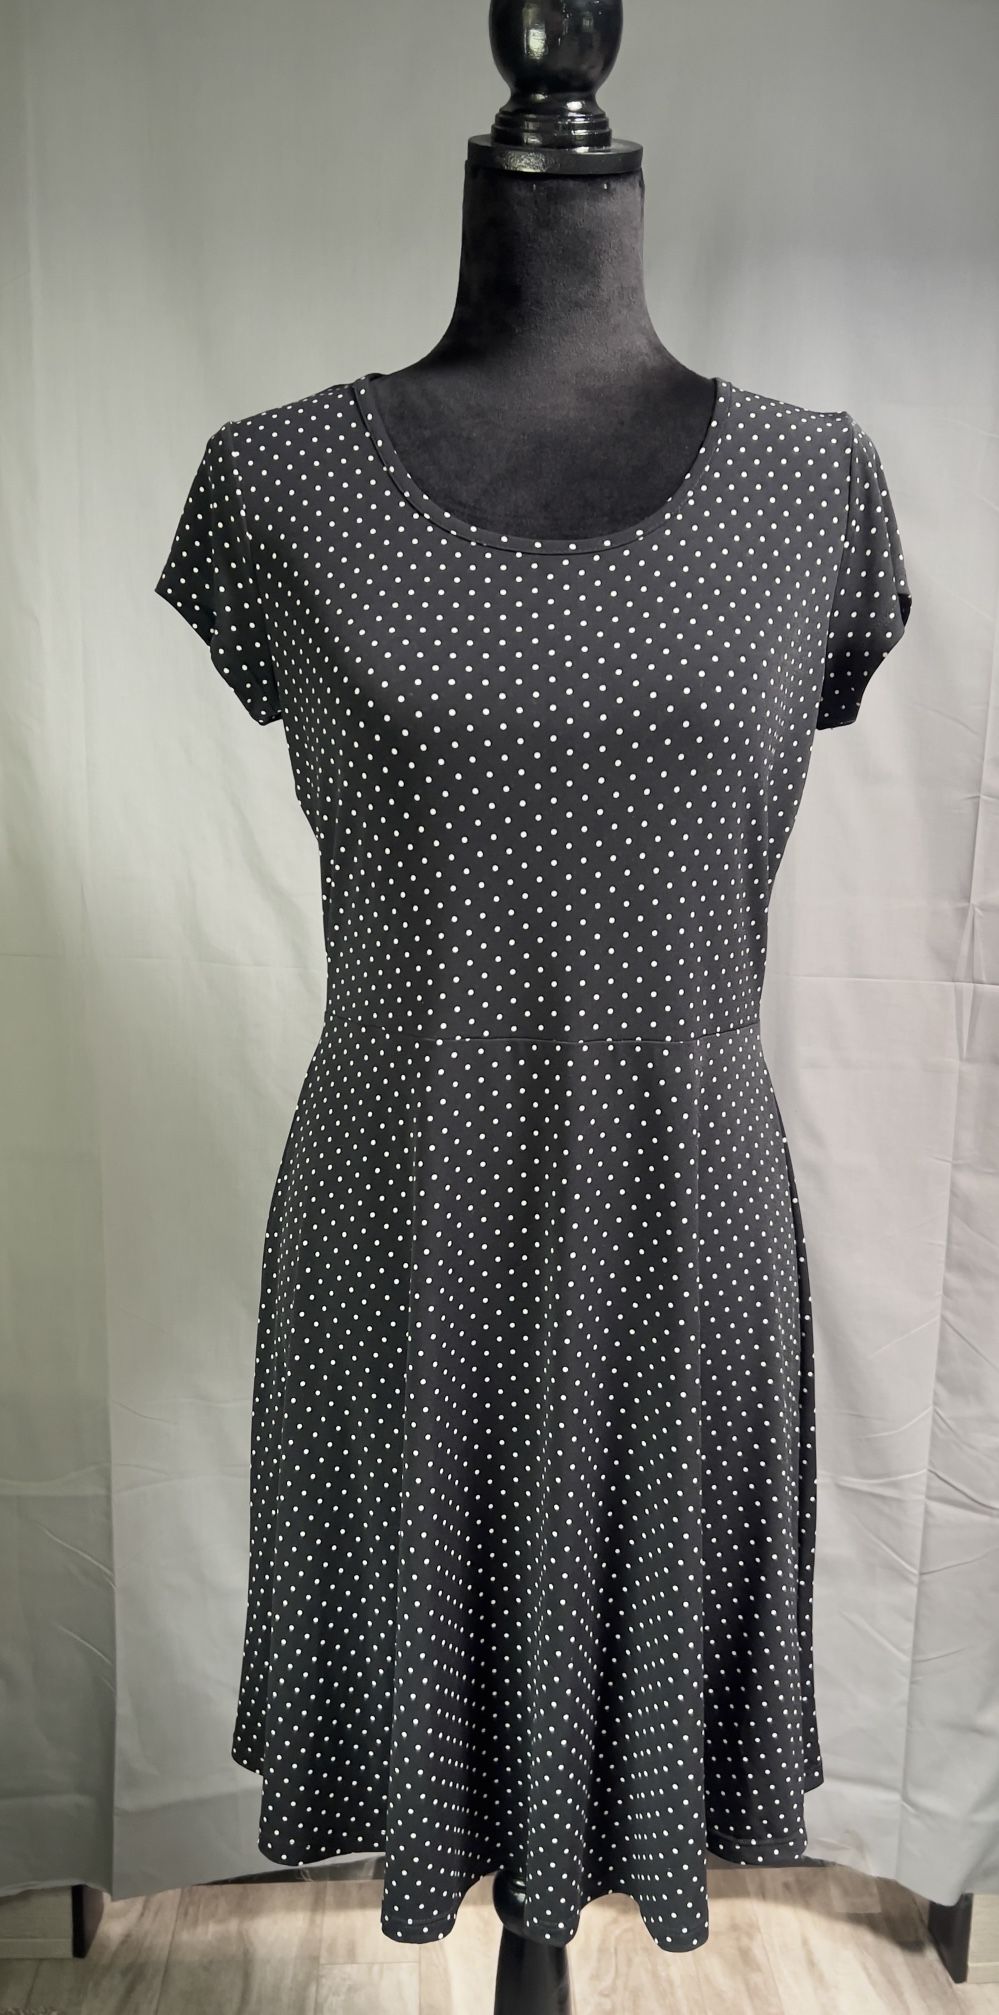 Michael Kors Size Medium Black and White Polkadot Fit and Flare Dress Flowing